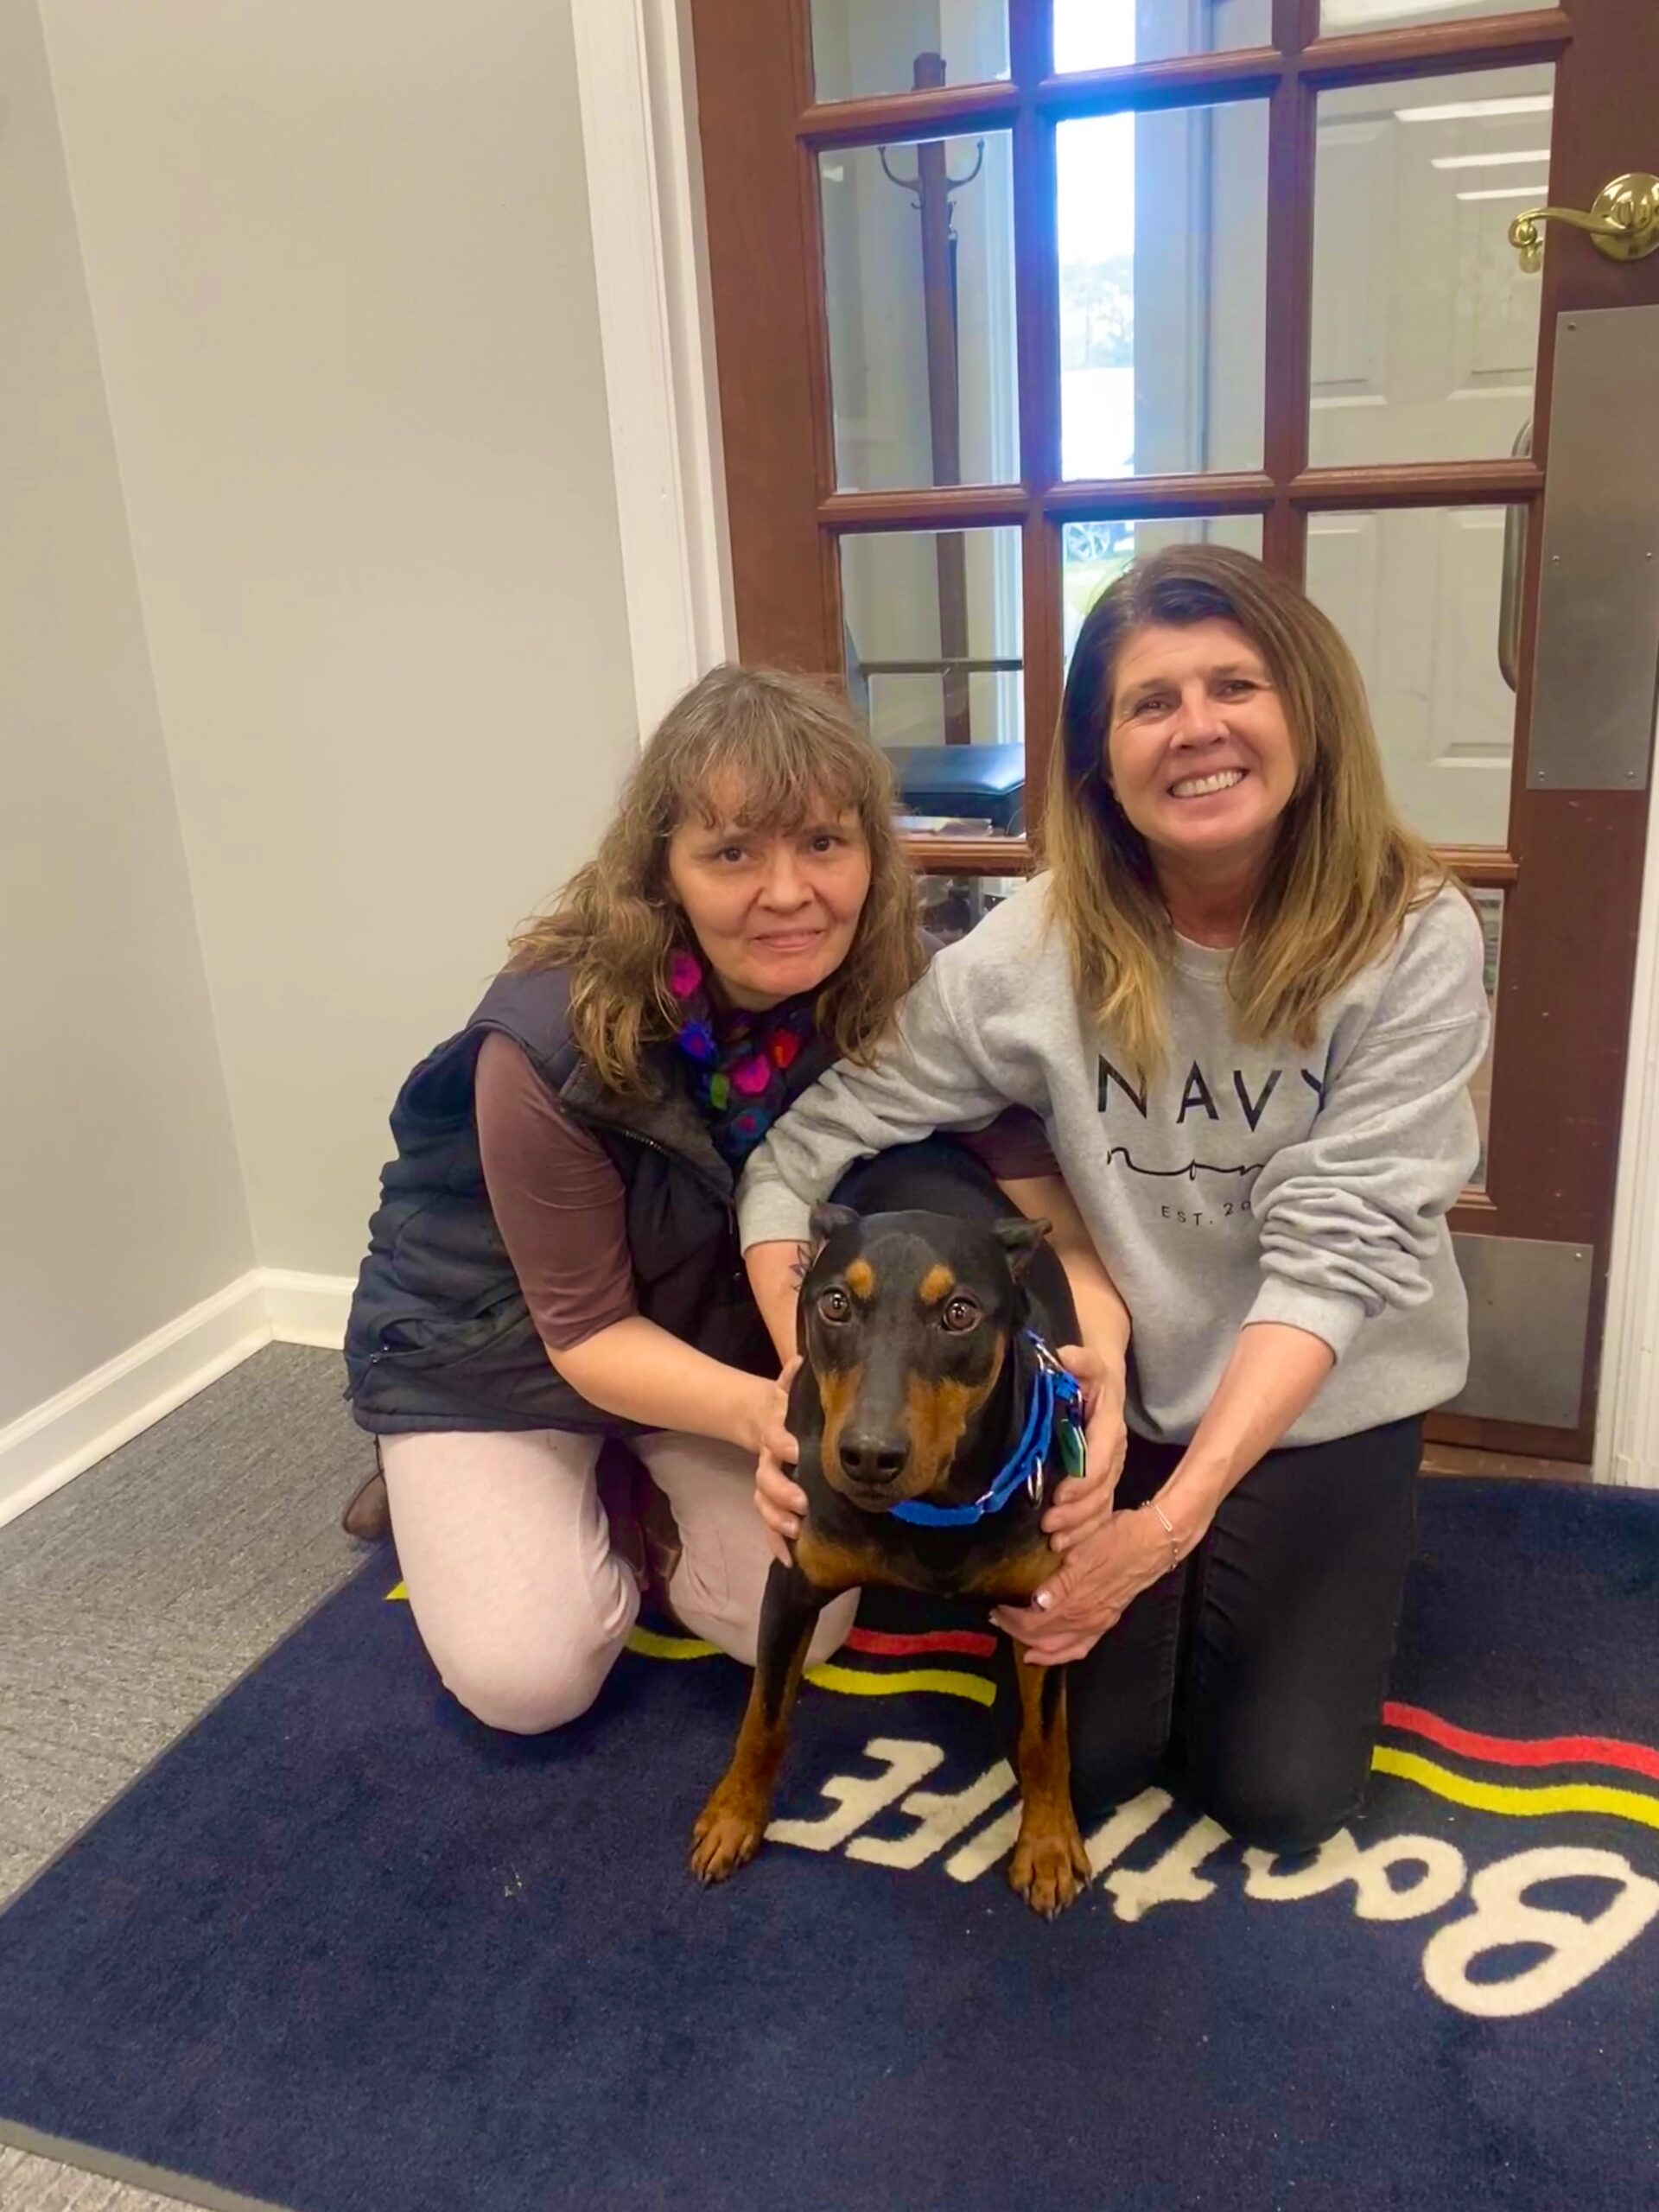 Robin and Maike with Schmitty the office dog